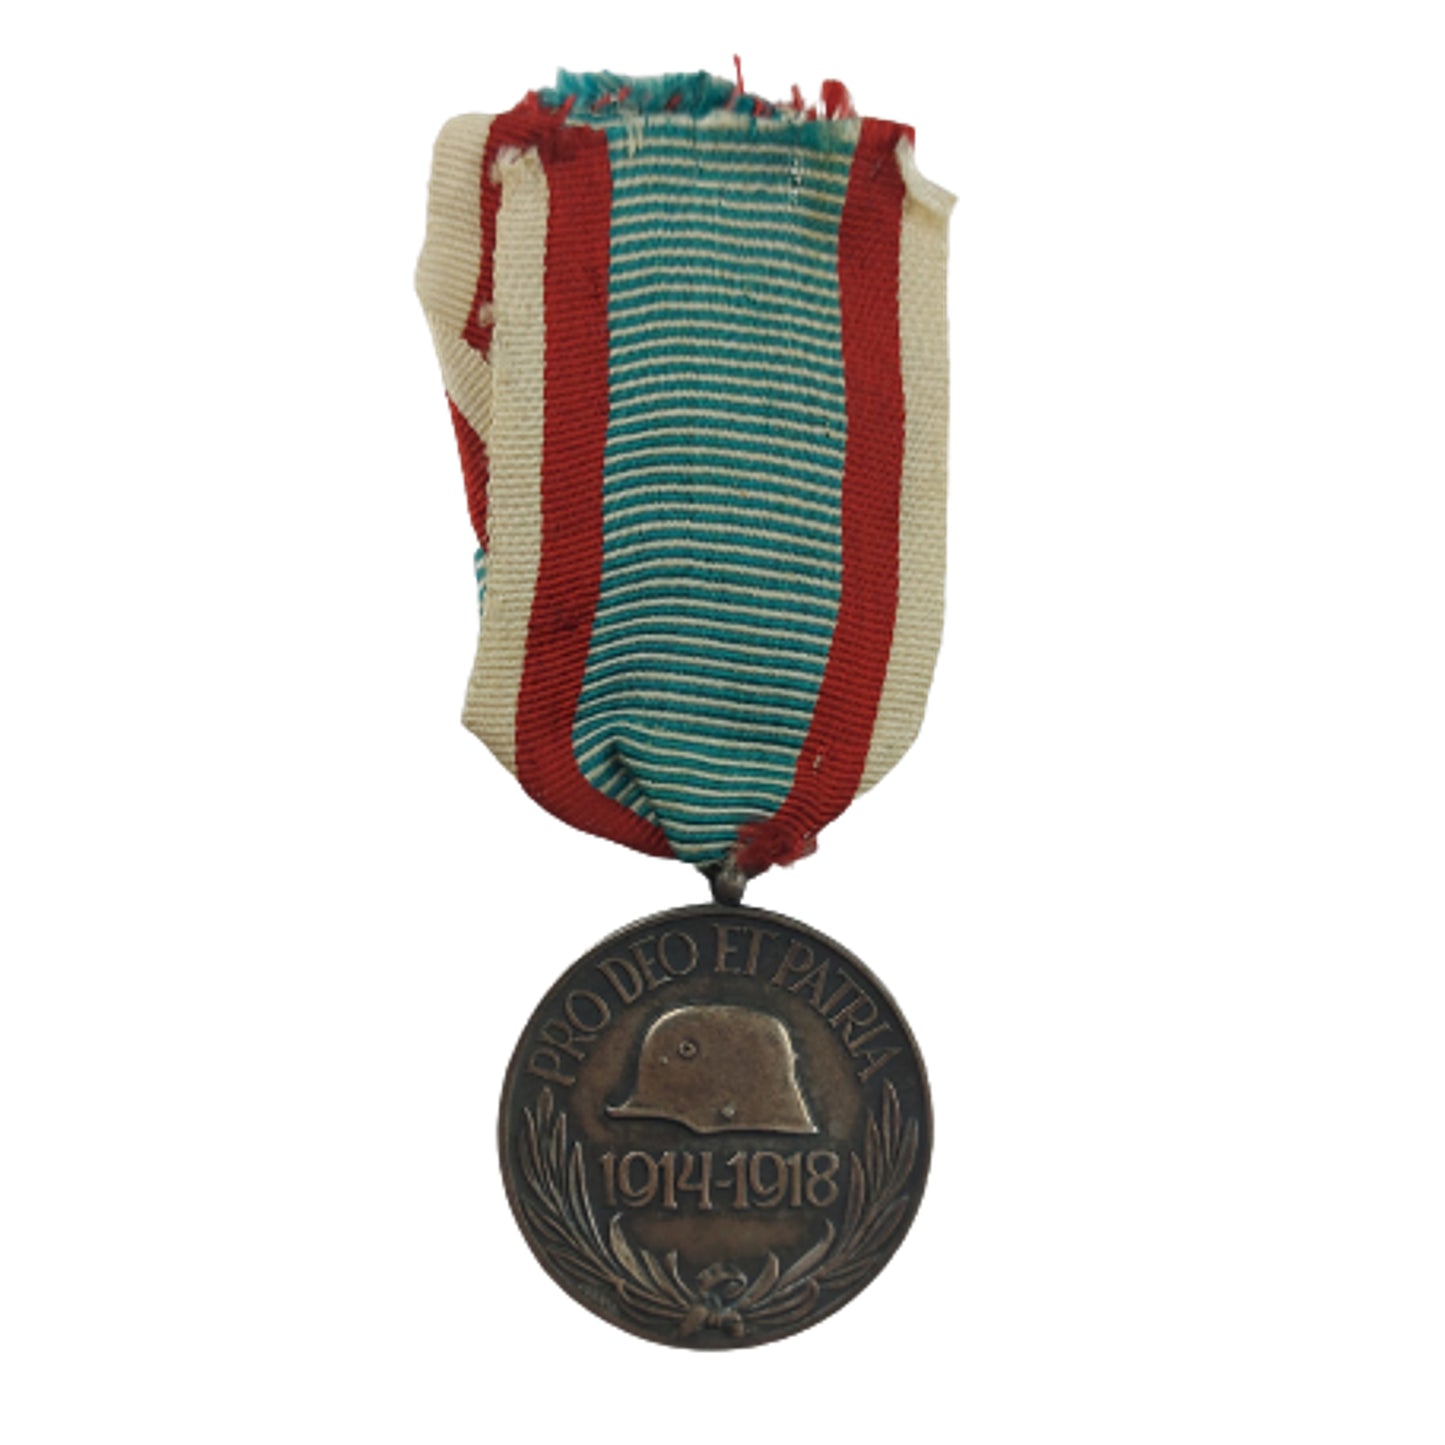 WW1 1914-1918 Hungarian Combatant's Commemorative Service Medal (Dienst Medaille)